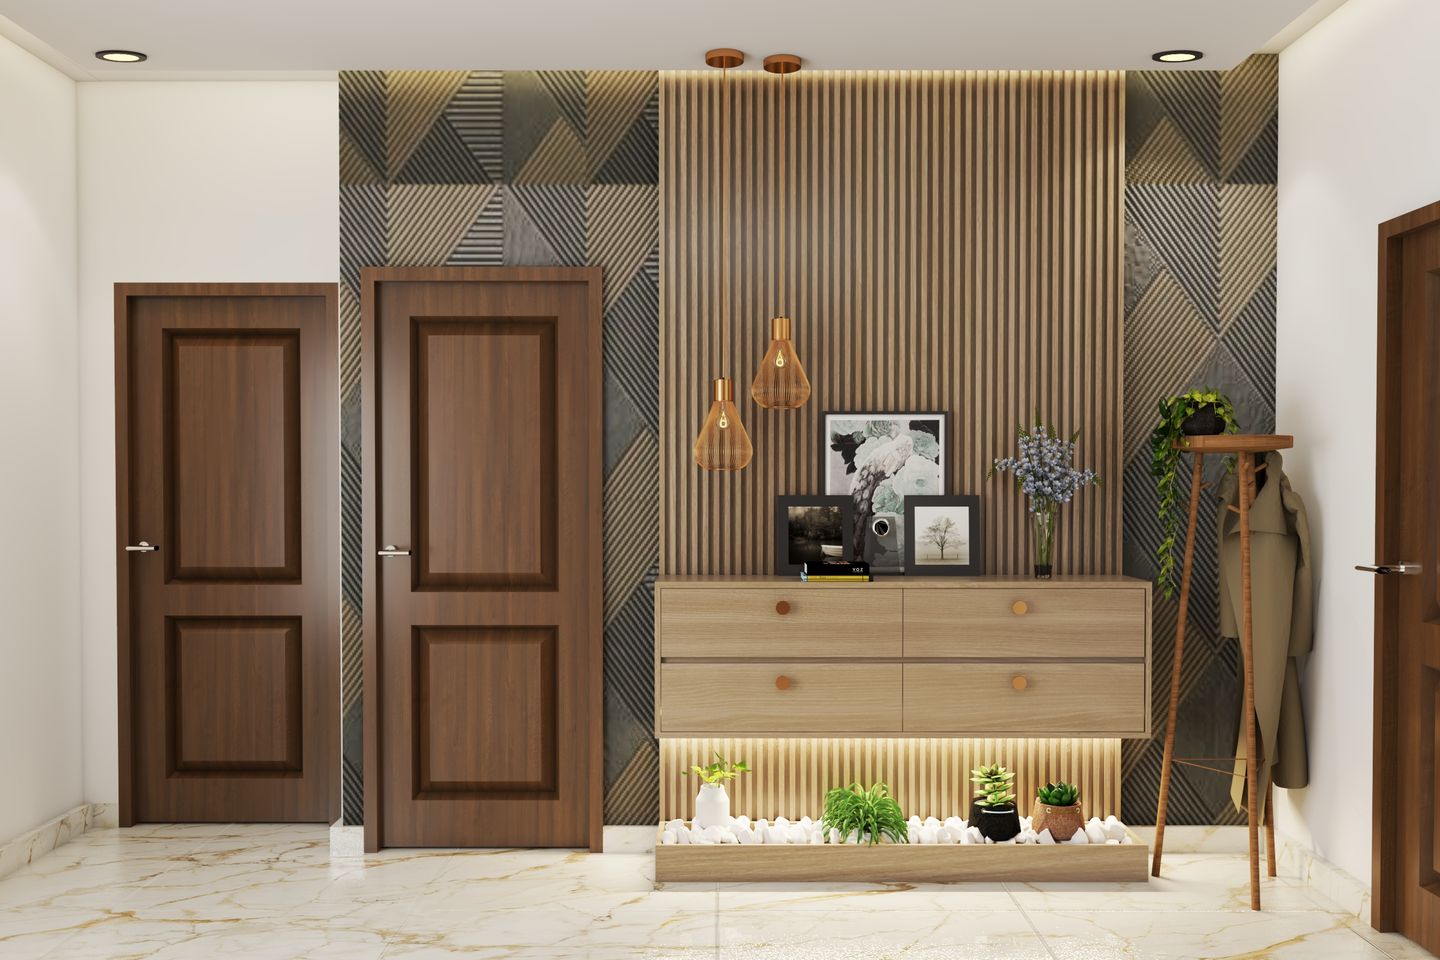 Contemporary Foyer Design With Wooden Panel - Livspace